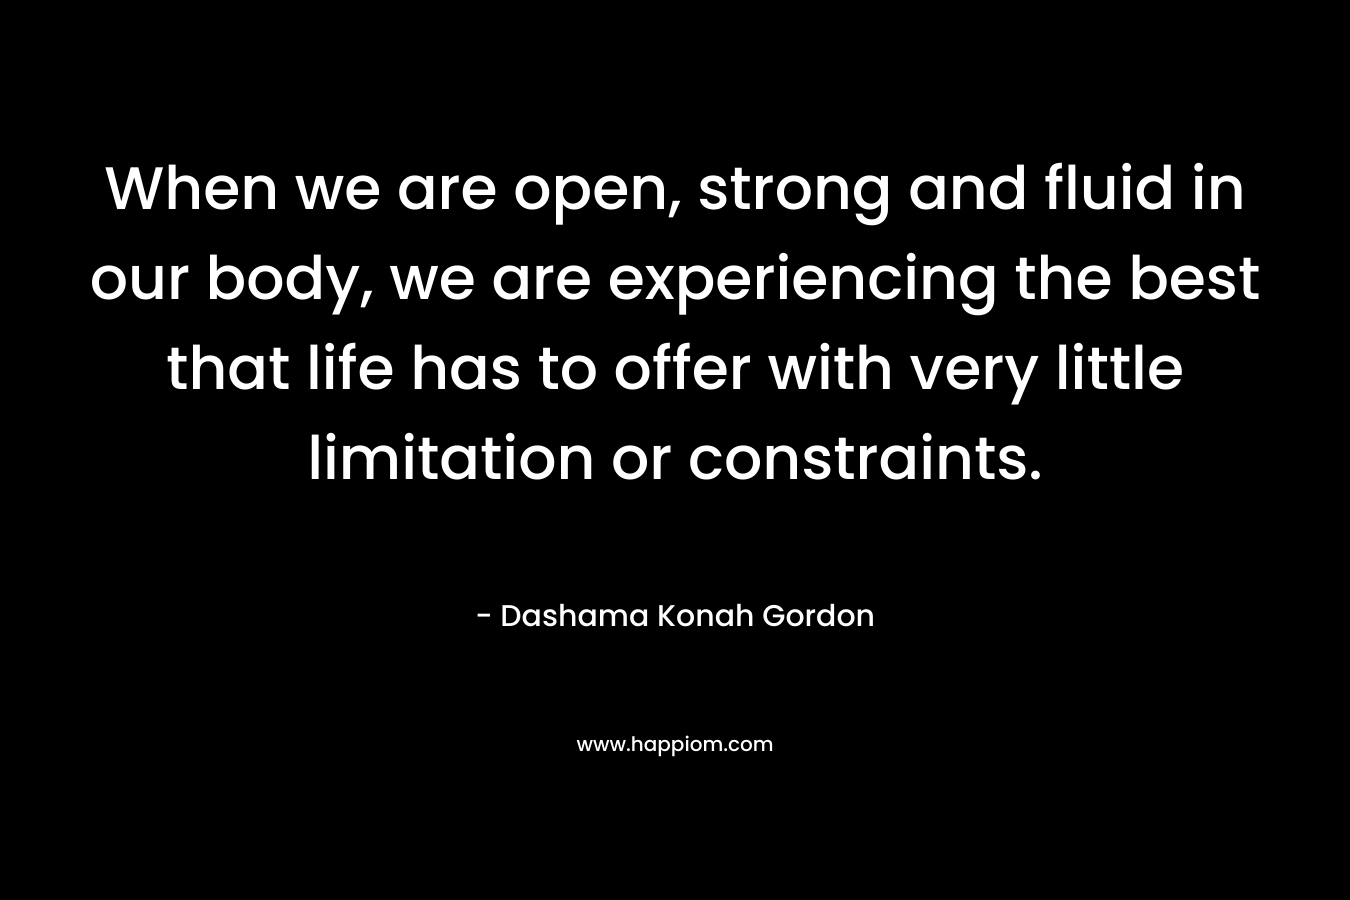 When we are open, strong and fluid in our body, we are experiencing the best that life has to offer with very little limitation or constraints.